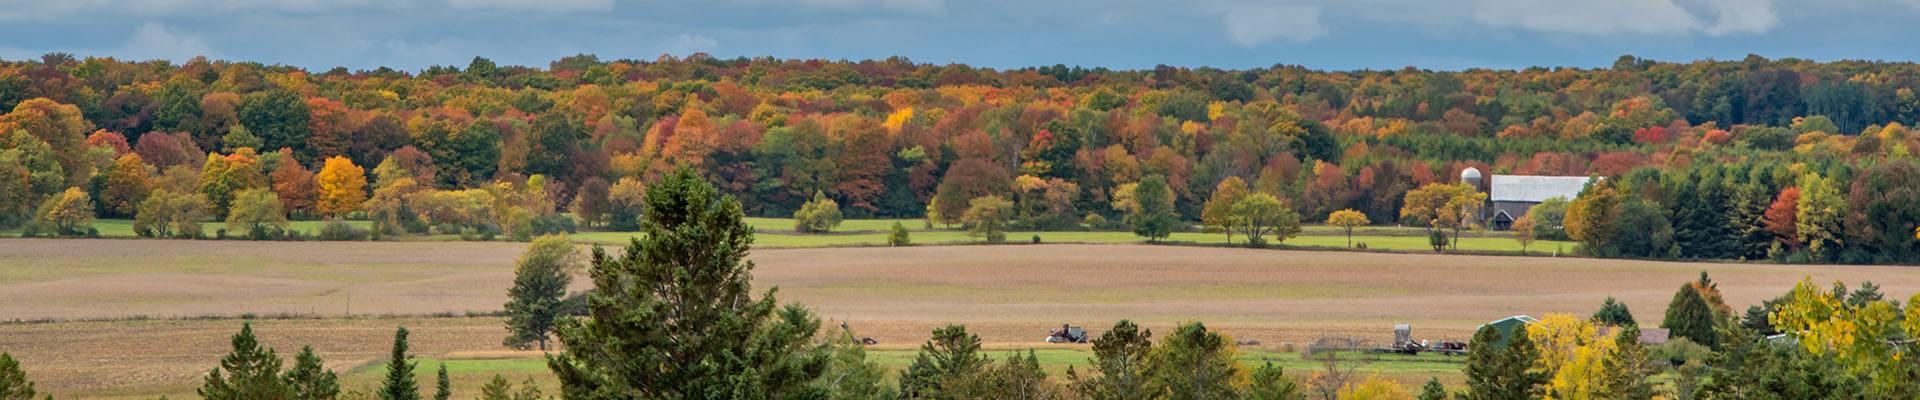 A field with fall color trees in the distance.